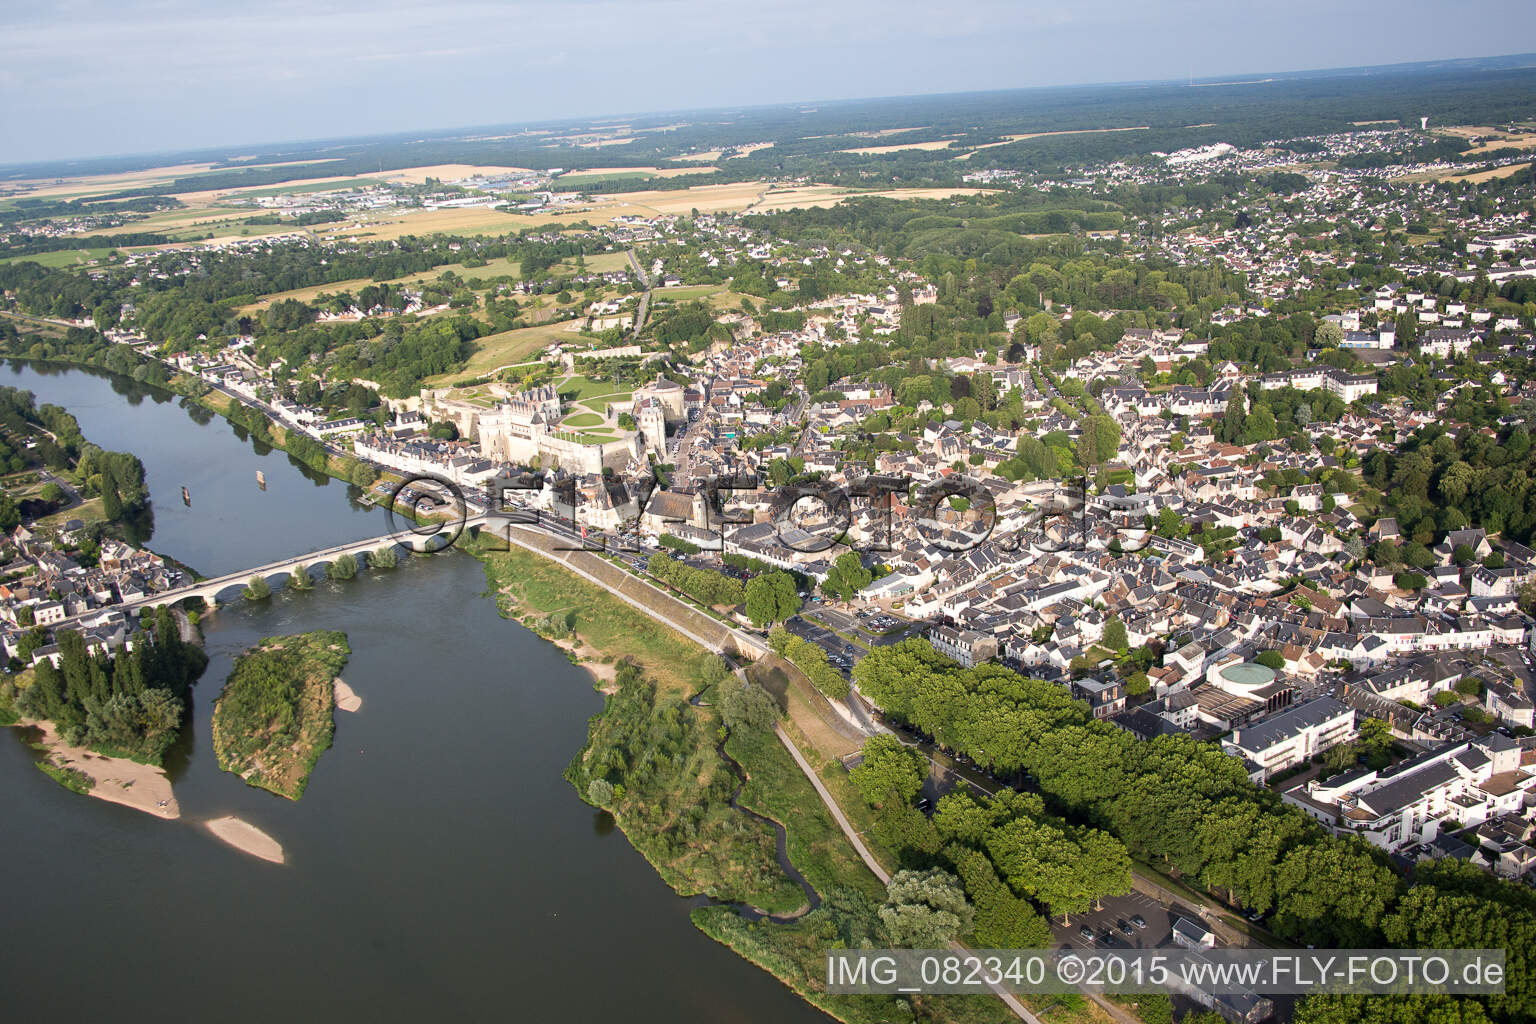 Drone recording of Amboise in the state Indre et Loire, France